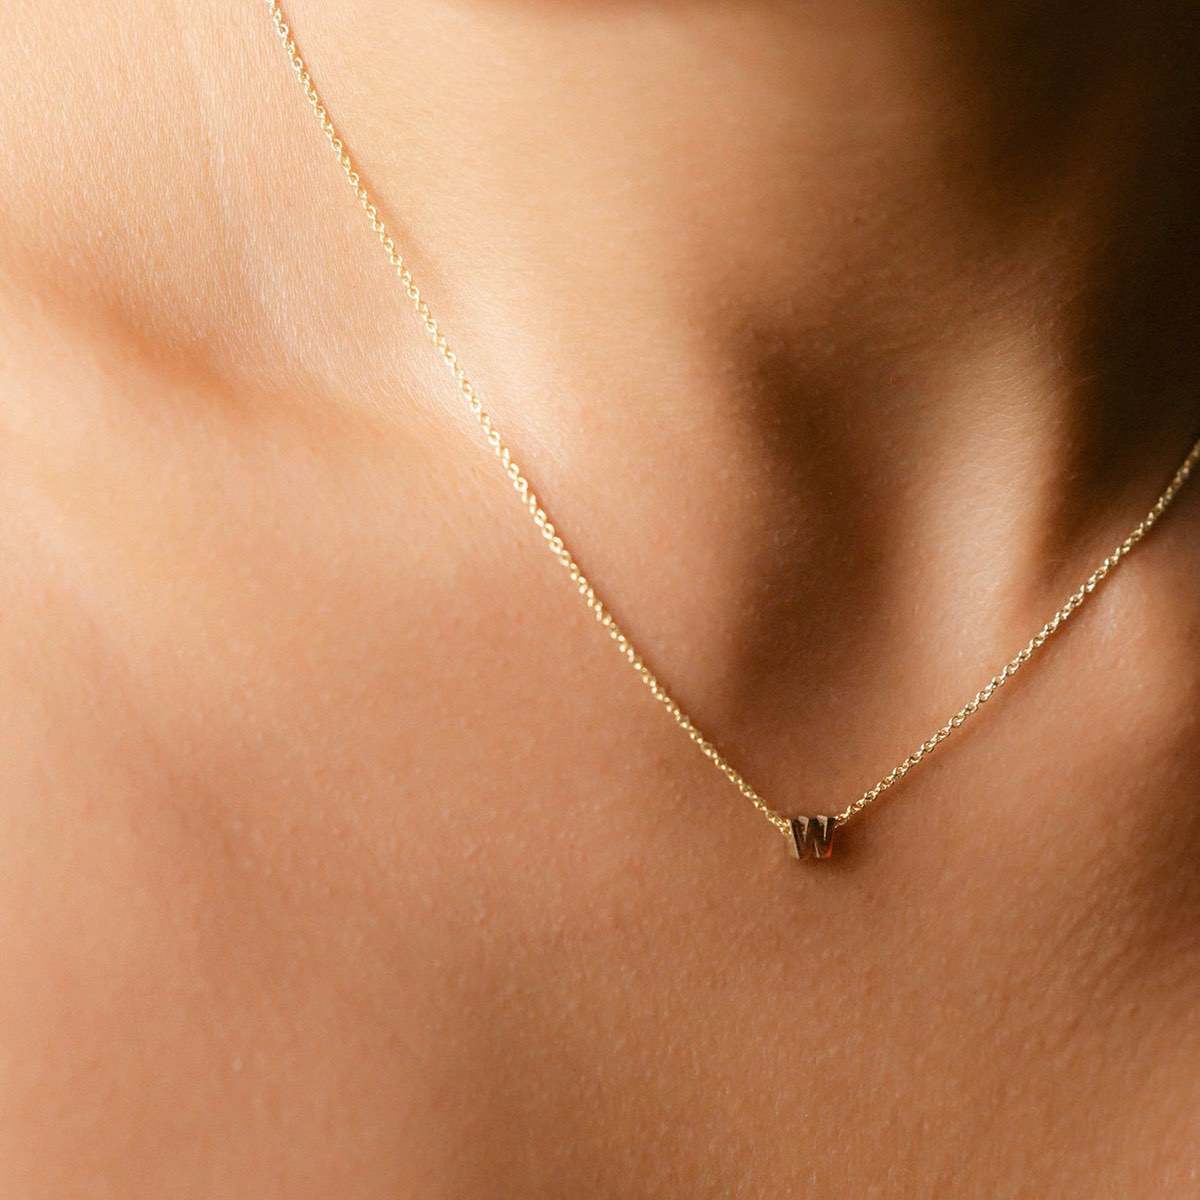 Hand finished solid gold letter necklace: Close up of a model wearing our beautiful 9ct yellow gold Tiny Letter W Charm Necklace with a 40cm cable chain